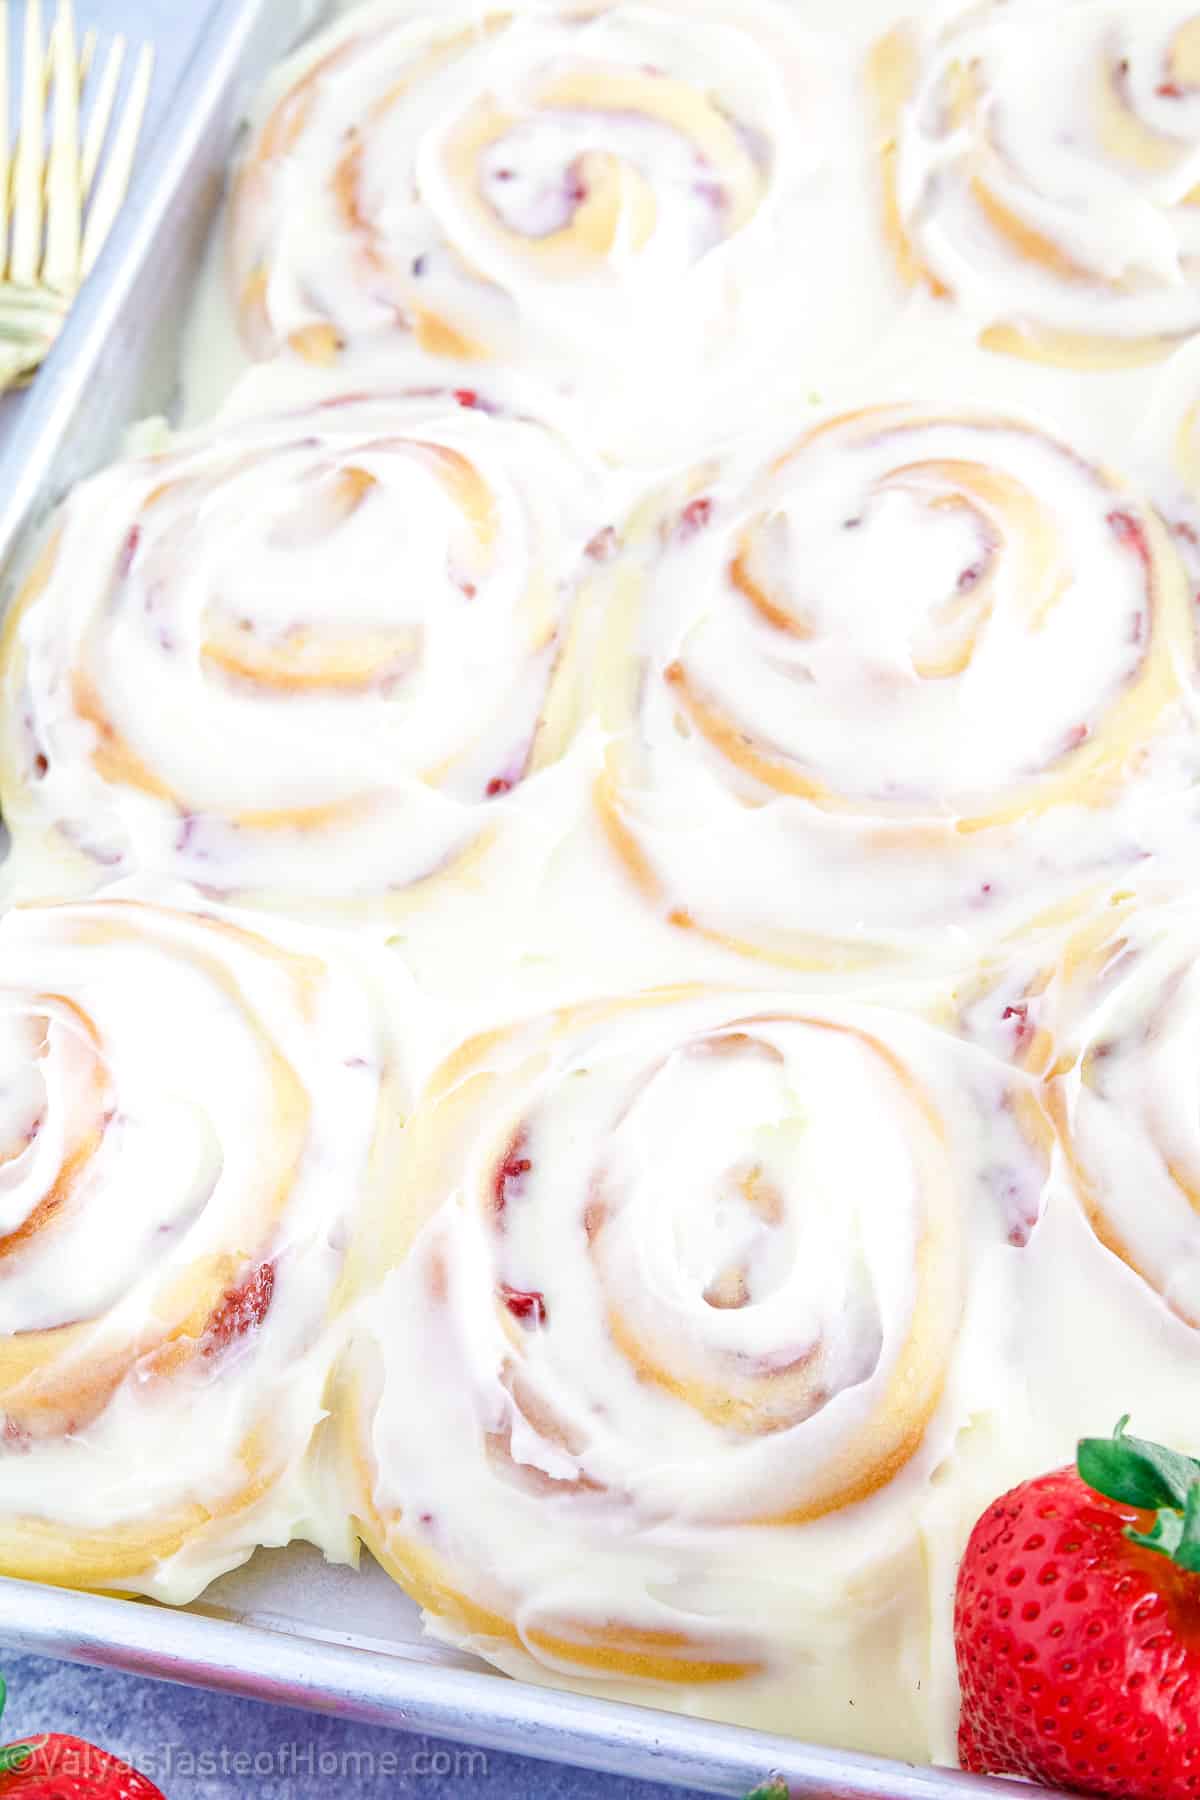 This recipe is perfect for anyone who loves the sweet and tangy flavor of fresh strawberries paired with warm, gooey cinnamon rolls.